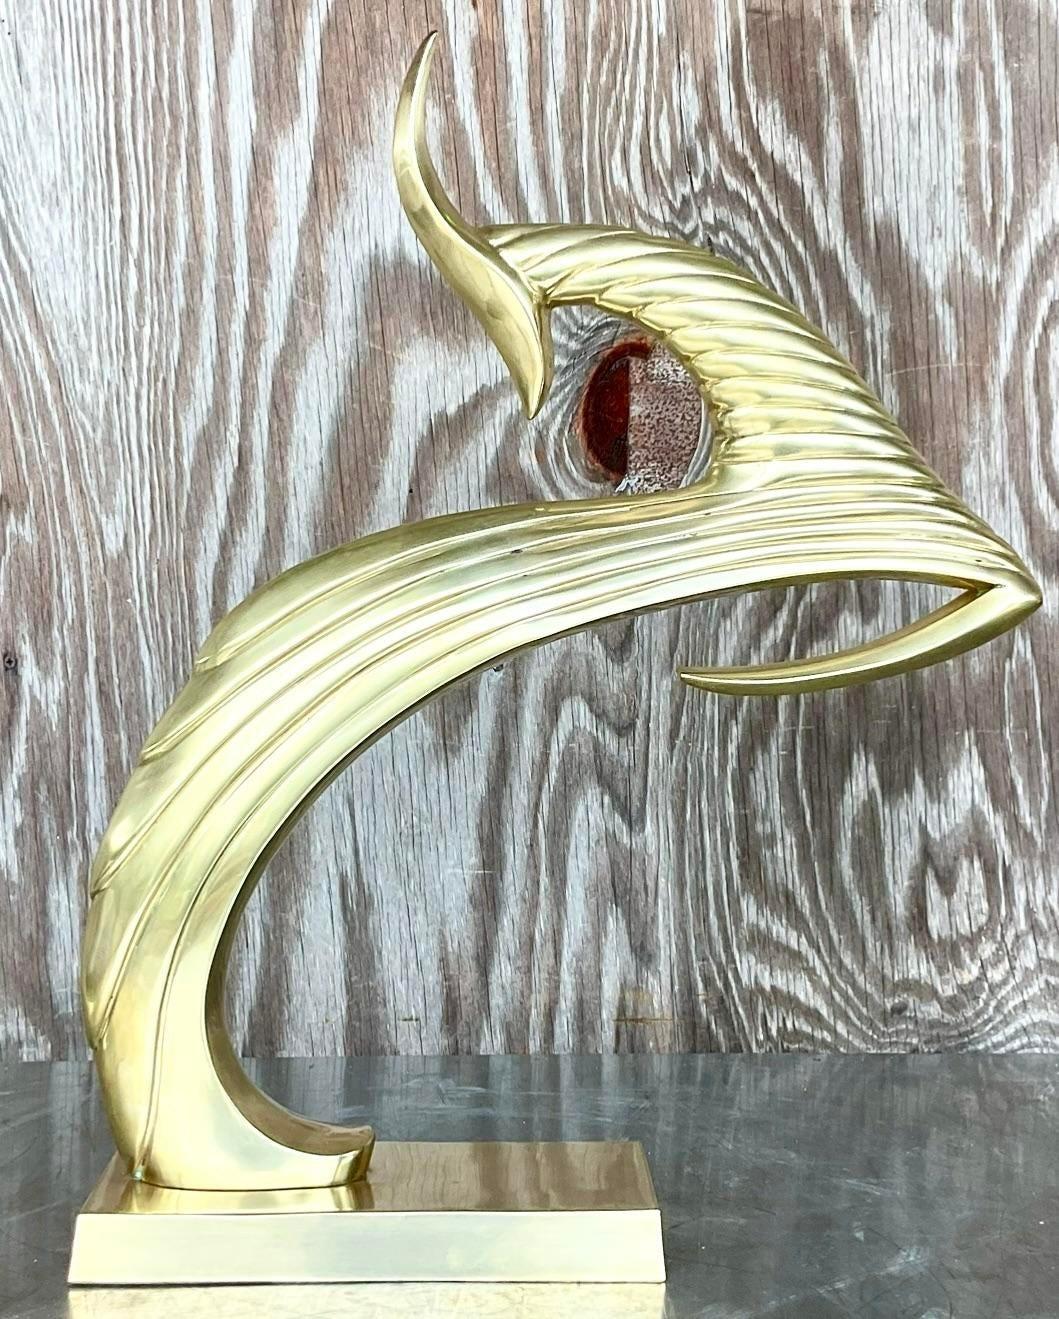 A stunning vintage a boho brass gazelle. A chic Art a deco style creature in a leaping motion. Acquired from a Palm Beach estate.